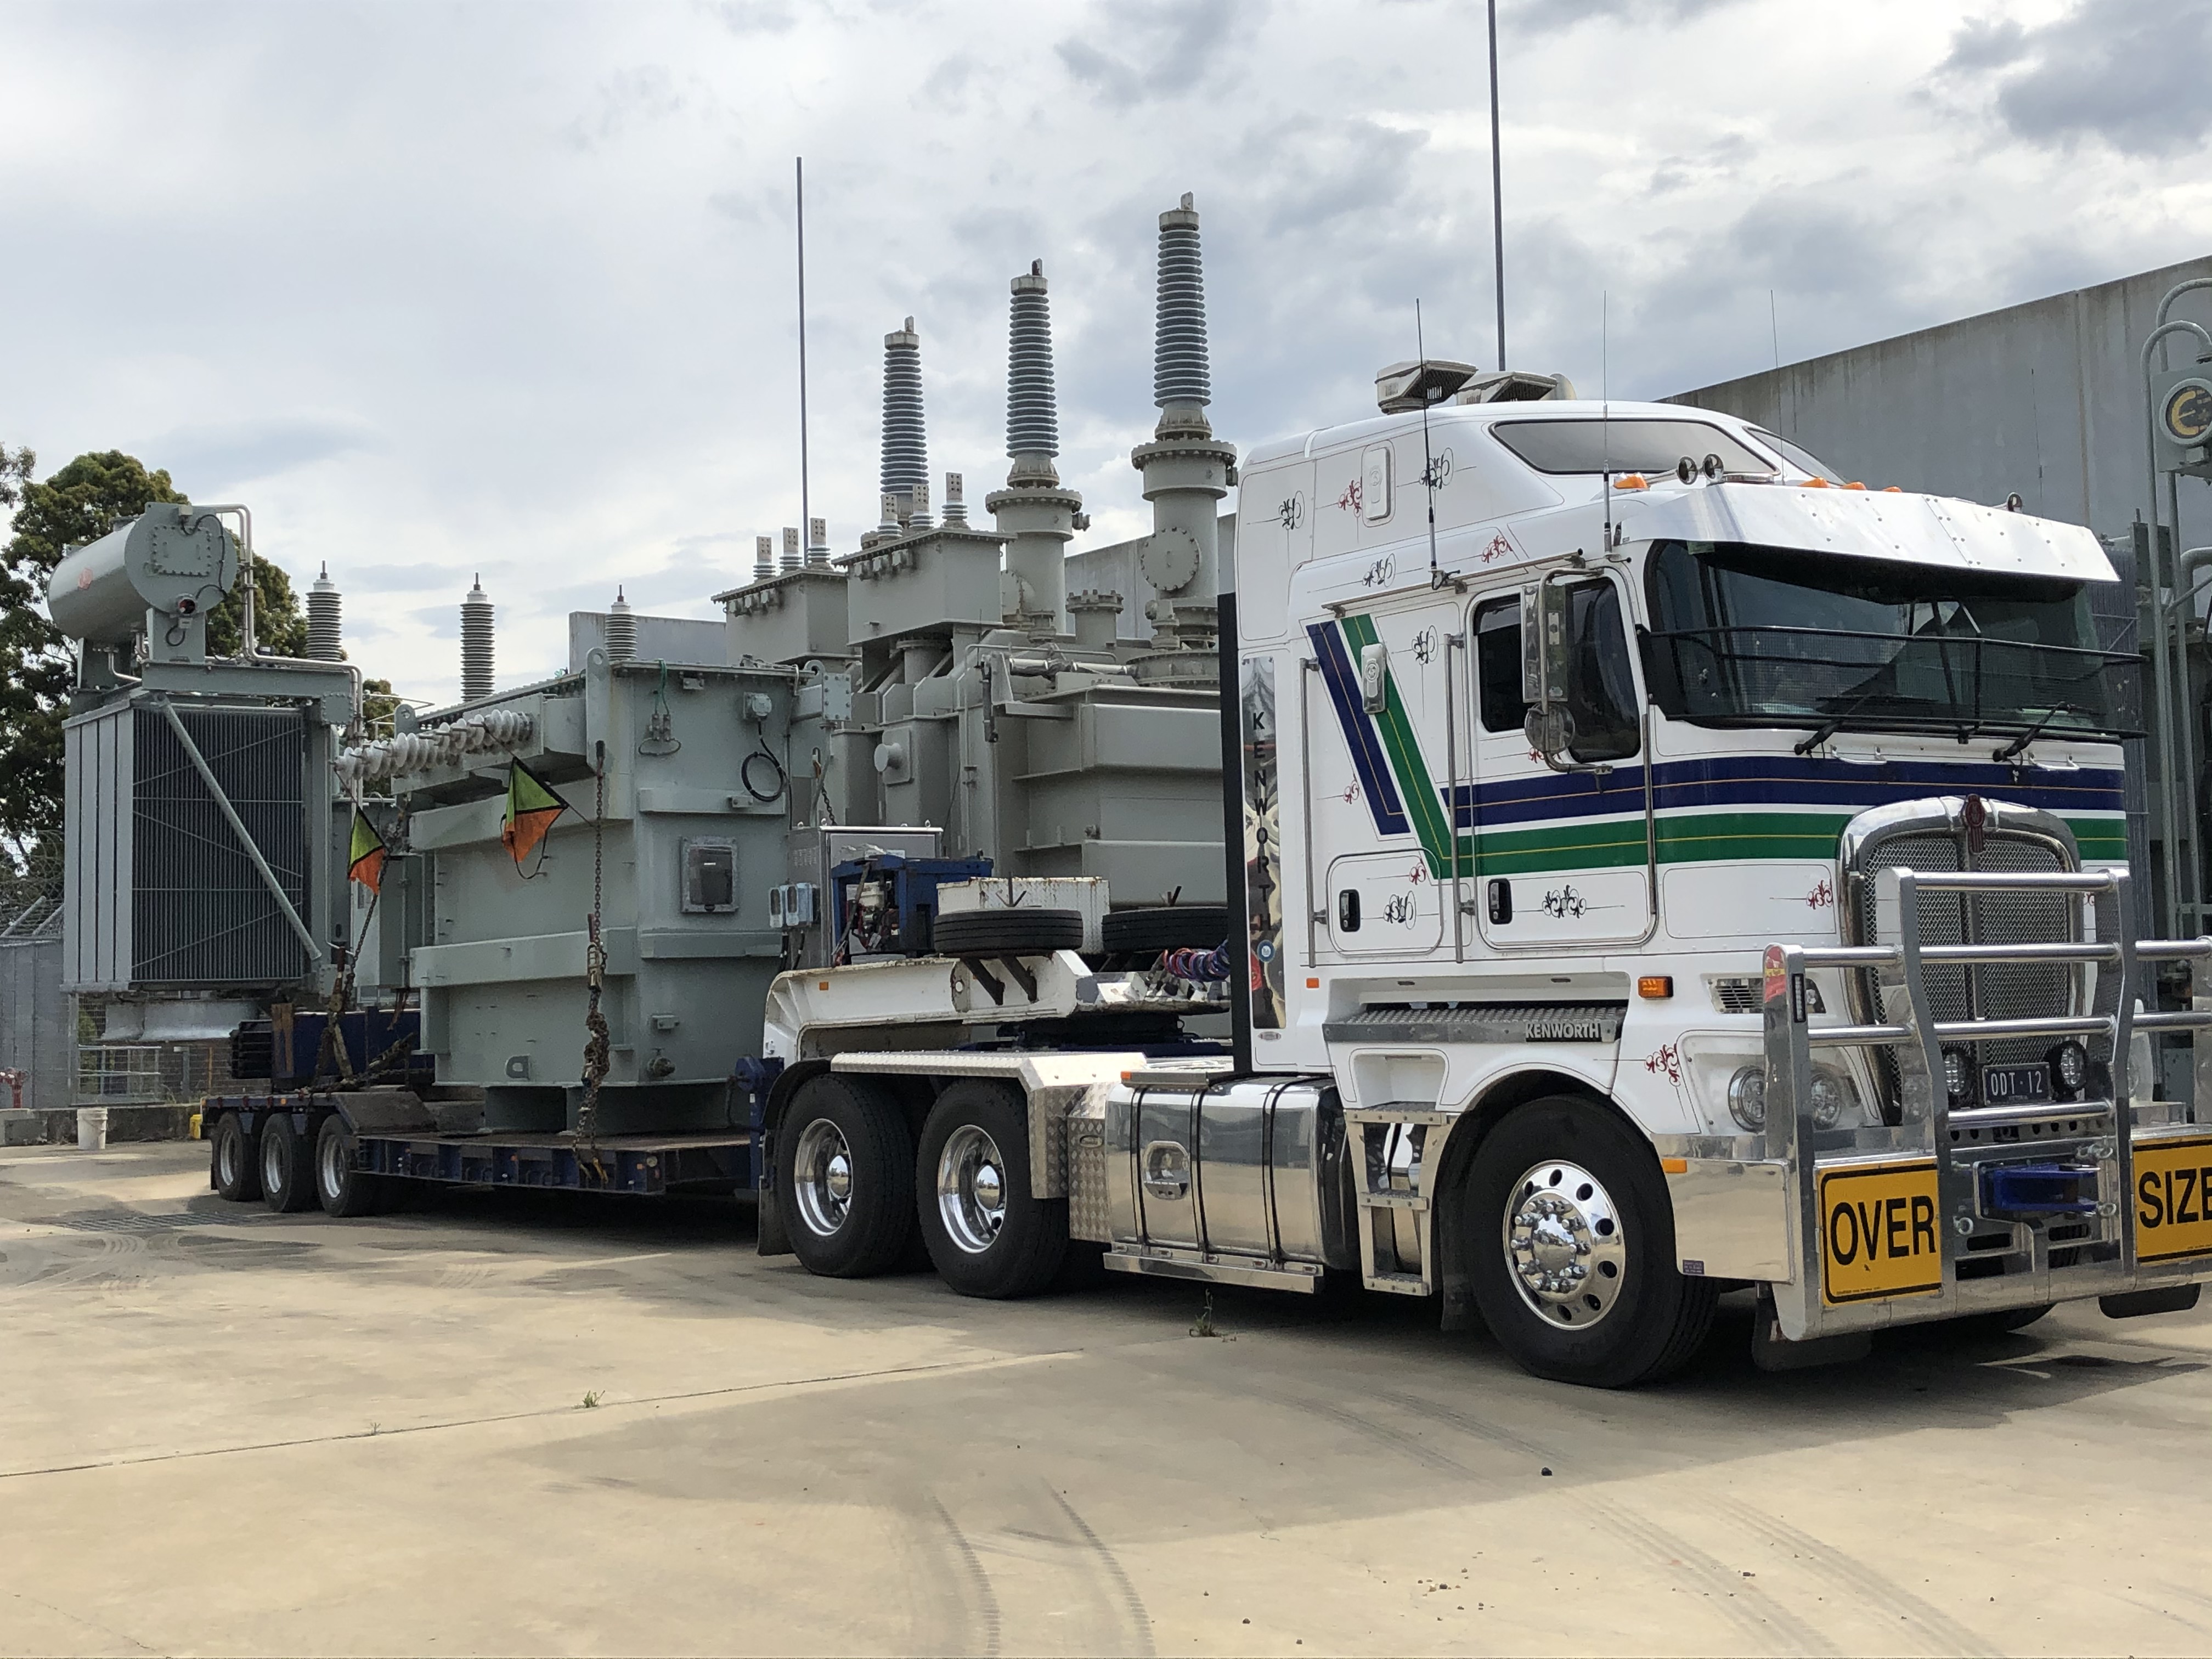 Image showing new electricity transformer on a truck ready for transport